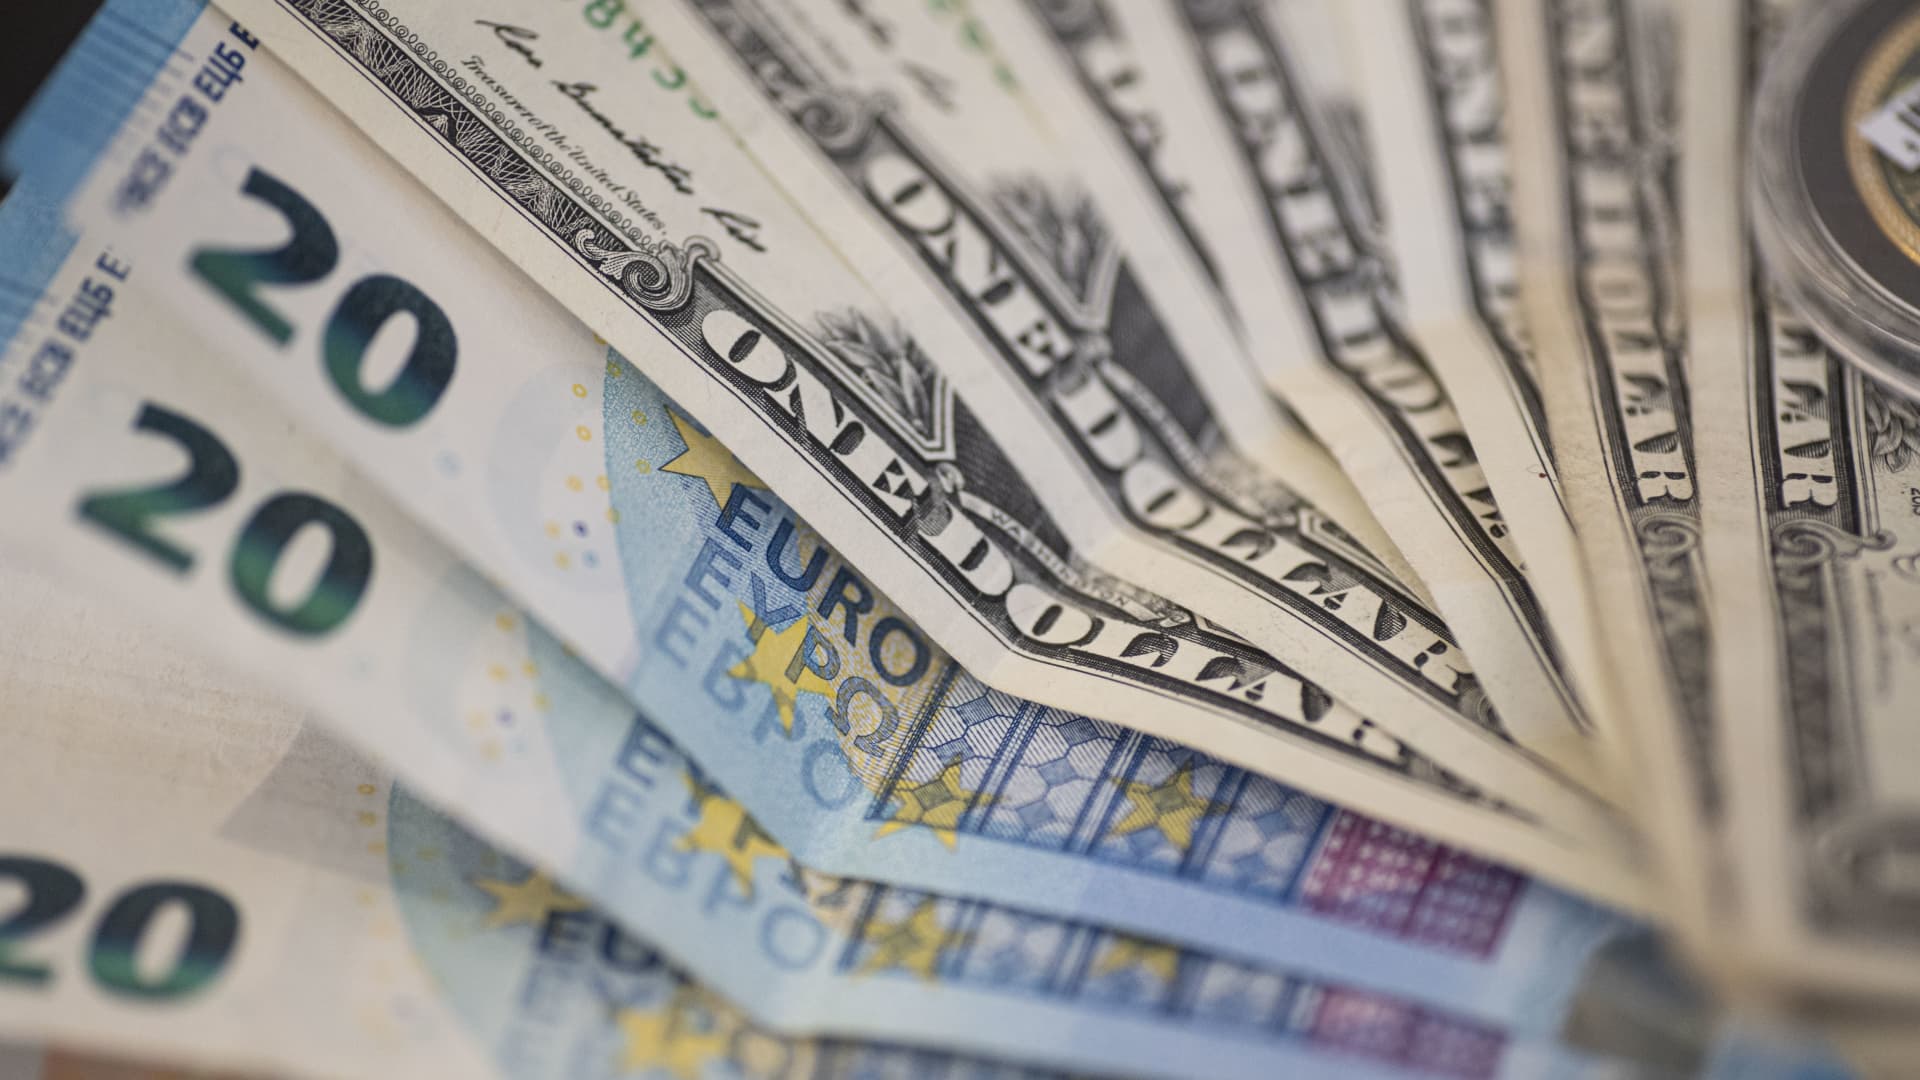 EUR/USD Forecast – Euro Continues to Consolidate